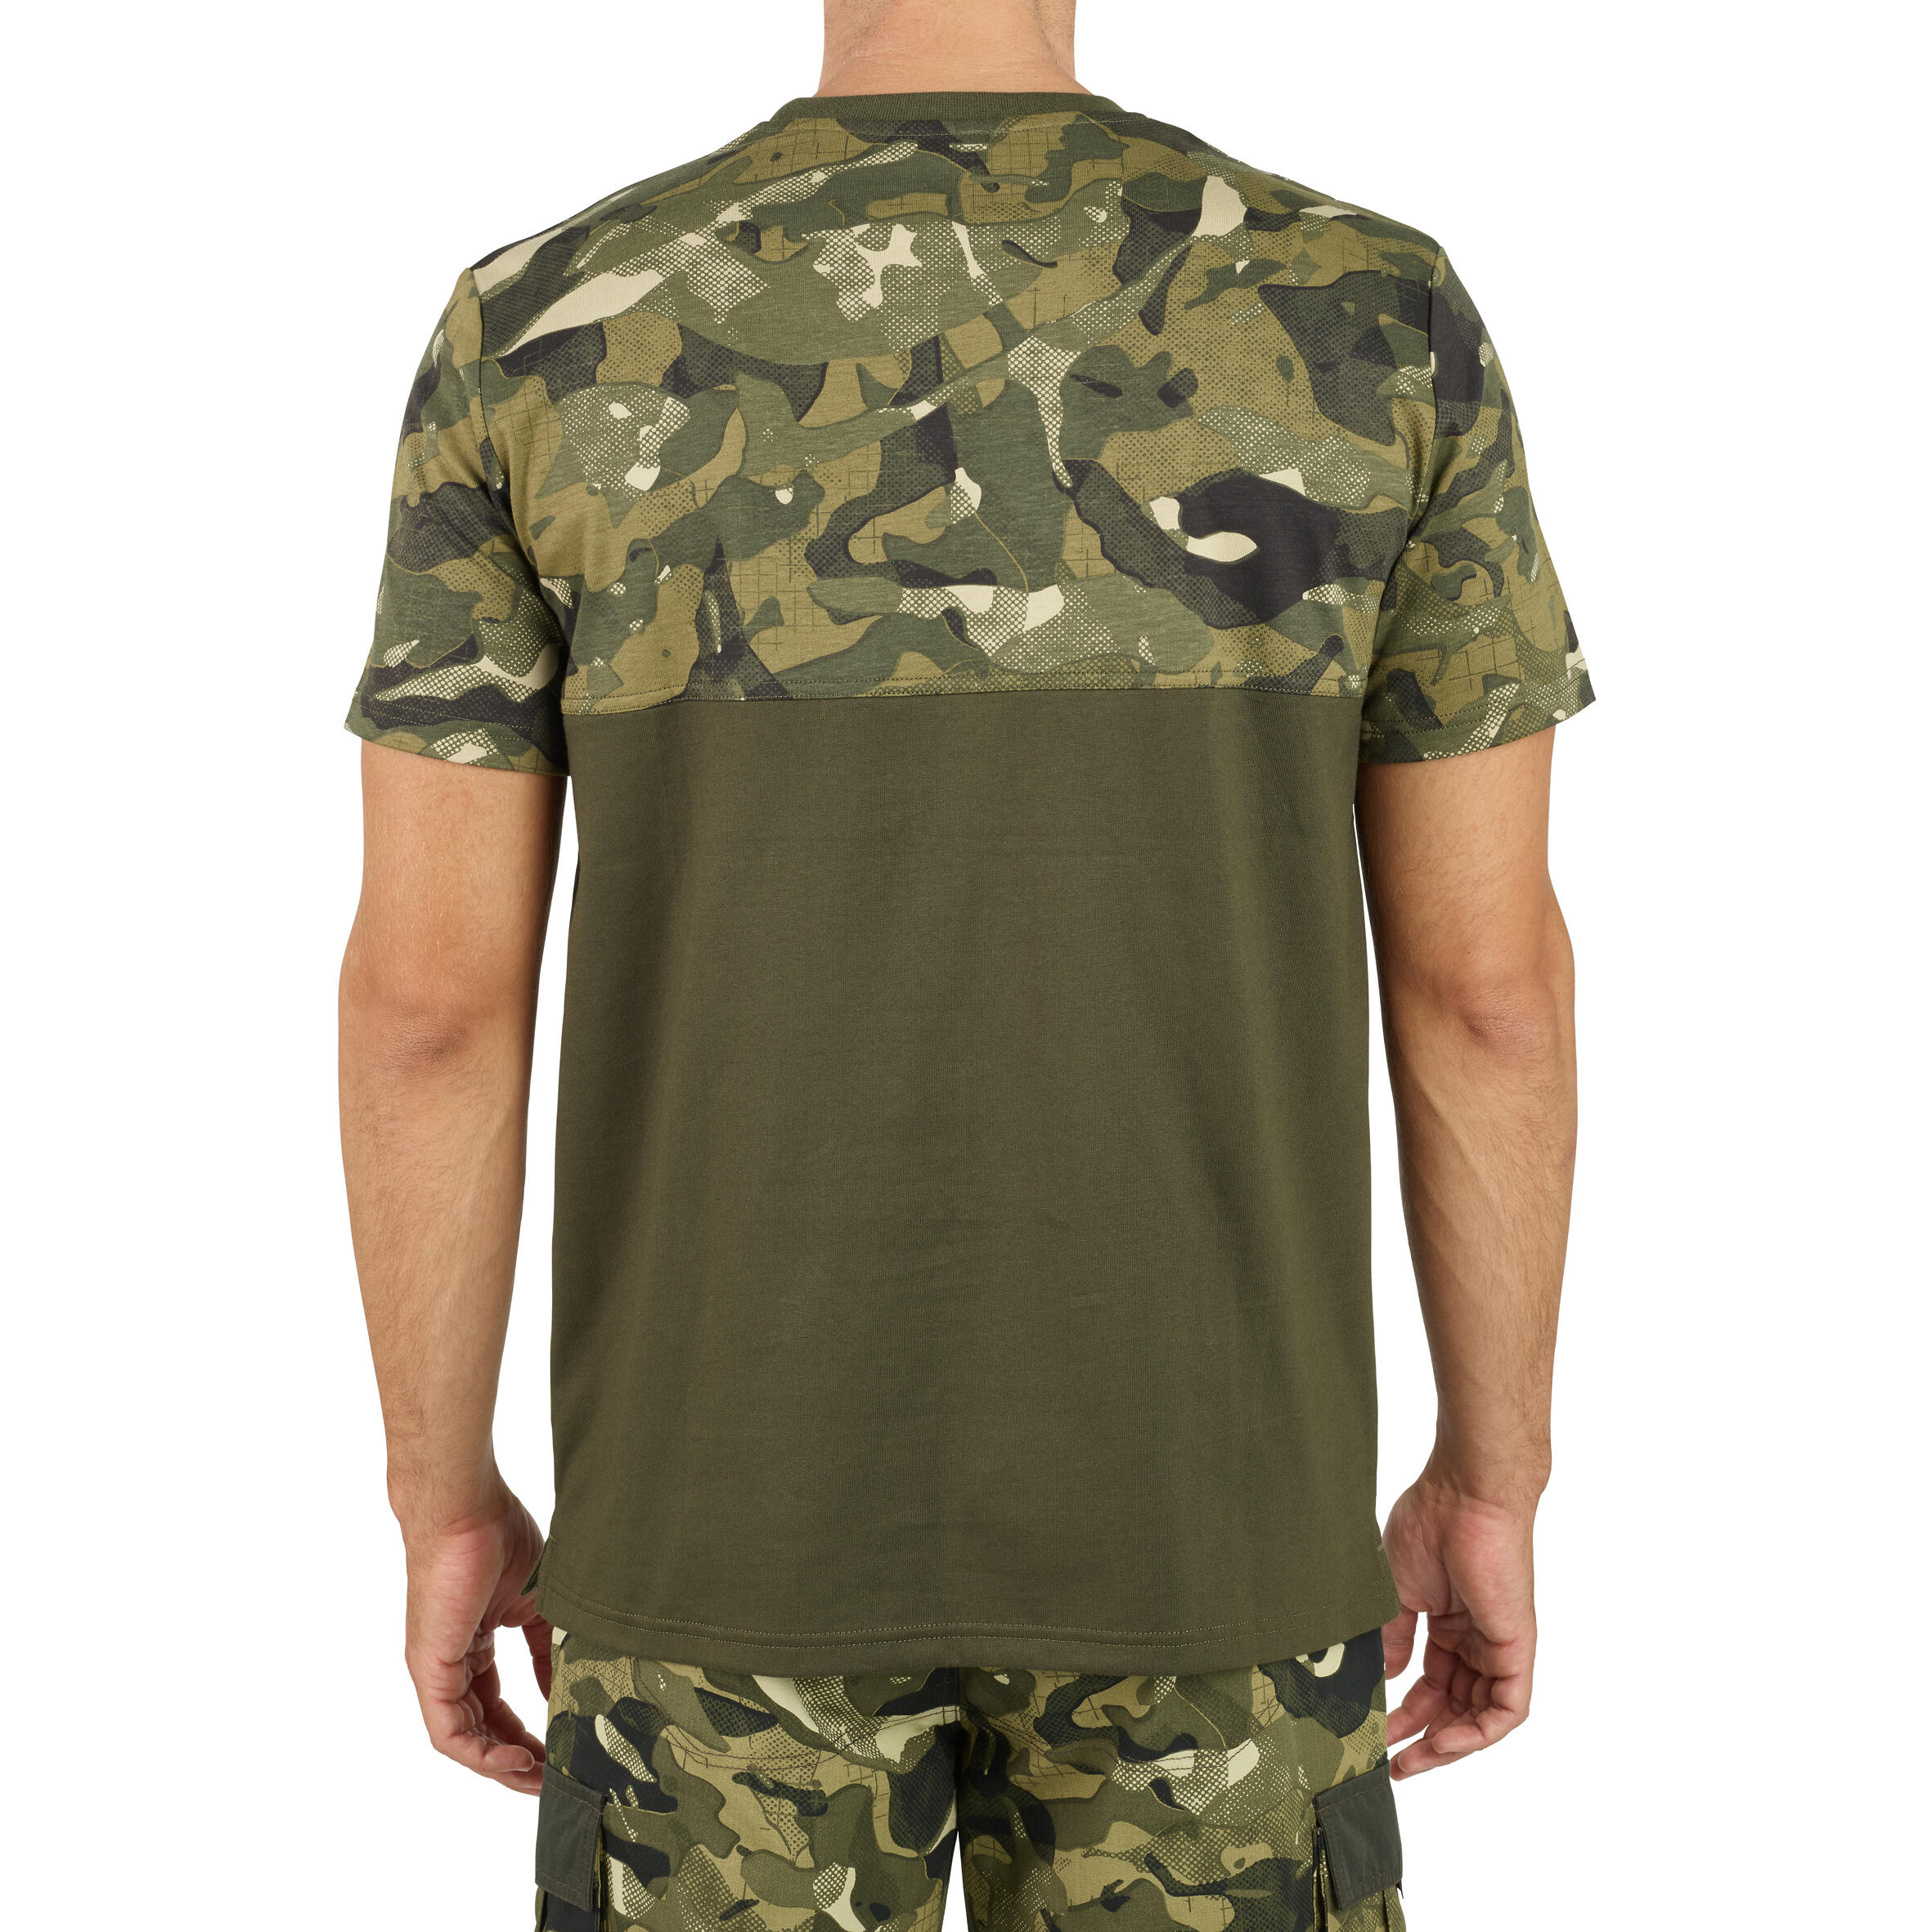 Men's Country Sport Short-Sleeved Resistant Cotton T-Shirt - 500 Woodland Camo/P 6/7